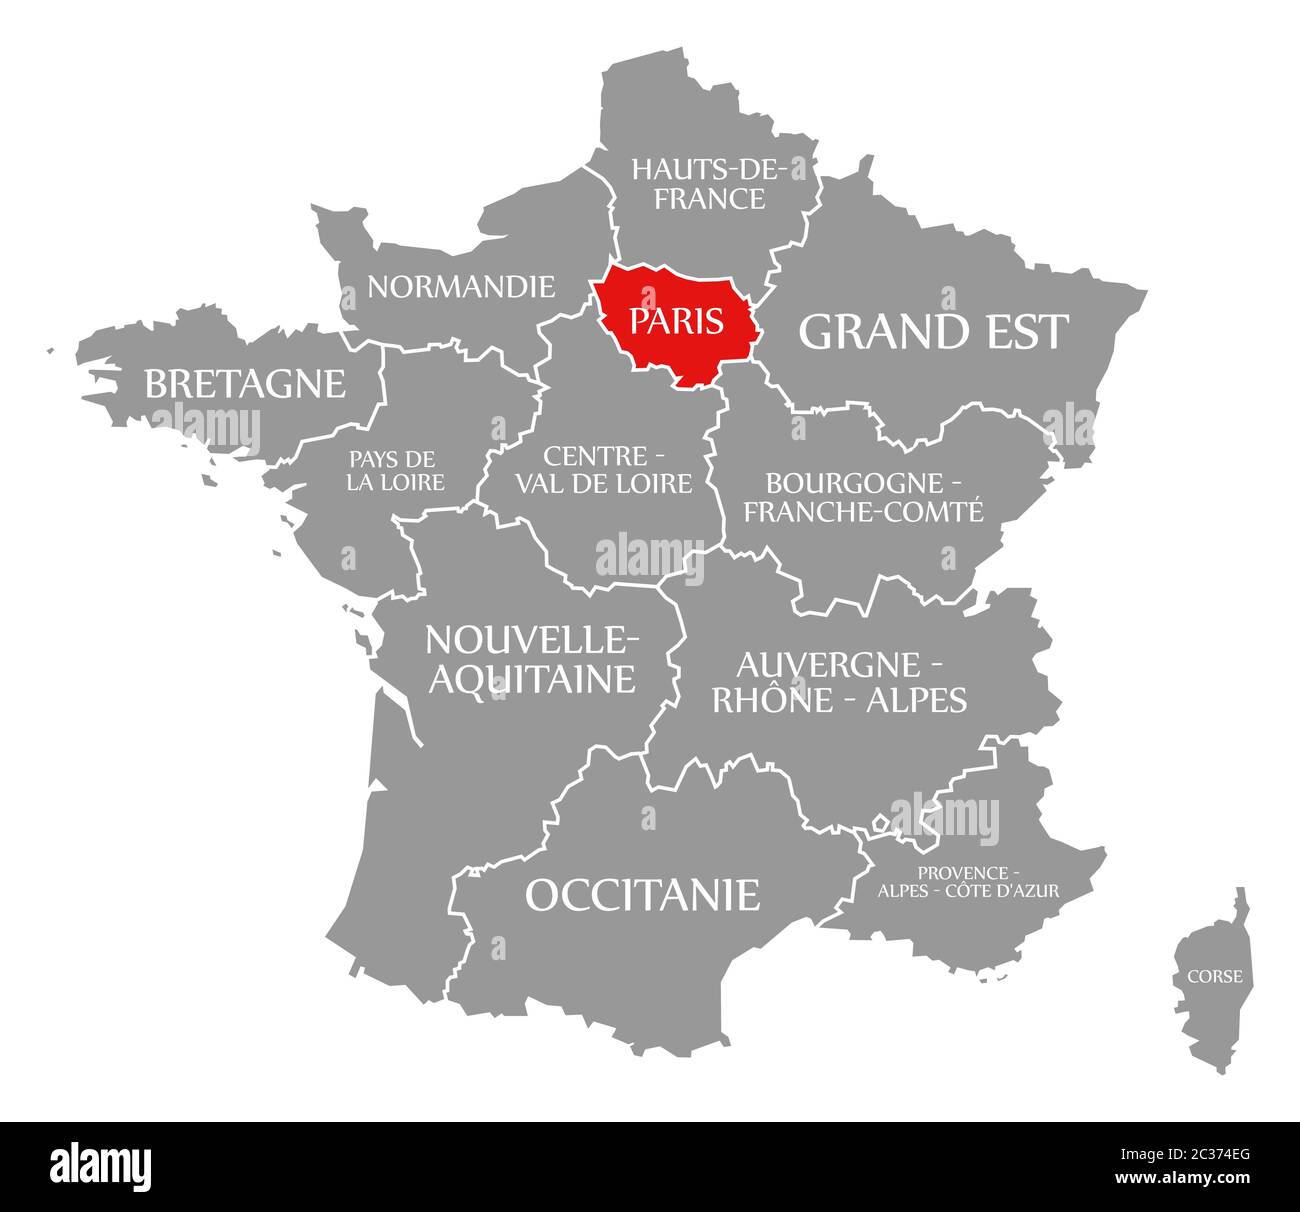 Paris red highlighted in map of France Stock Photo - Alamy